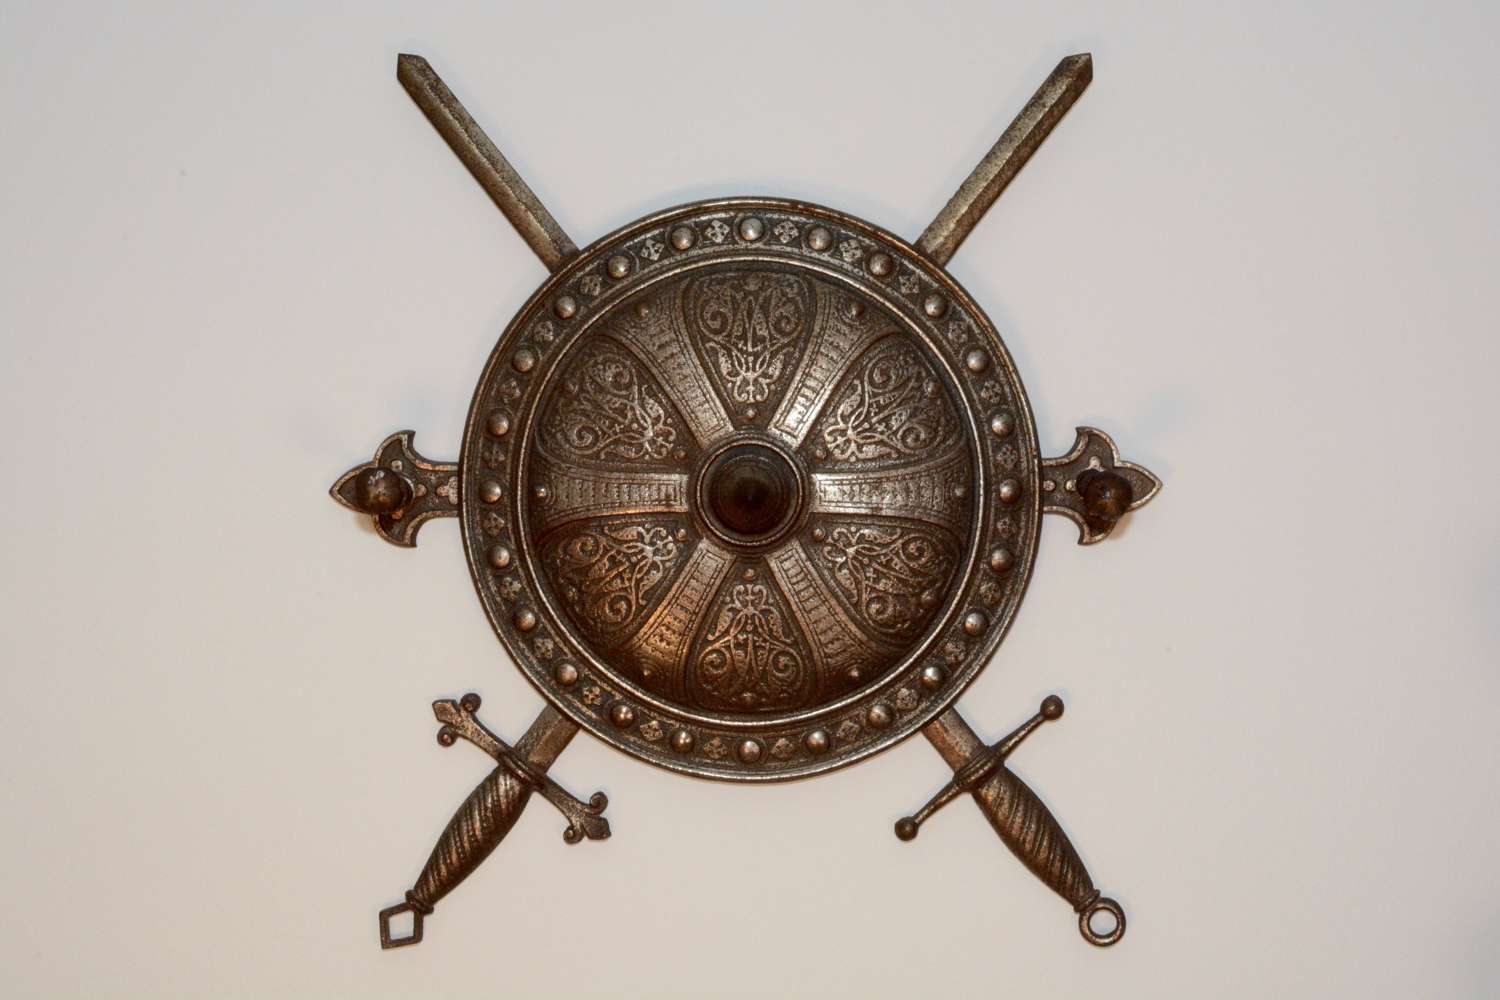 Hat and coat rack in the form of a round shield with crossed swords